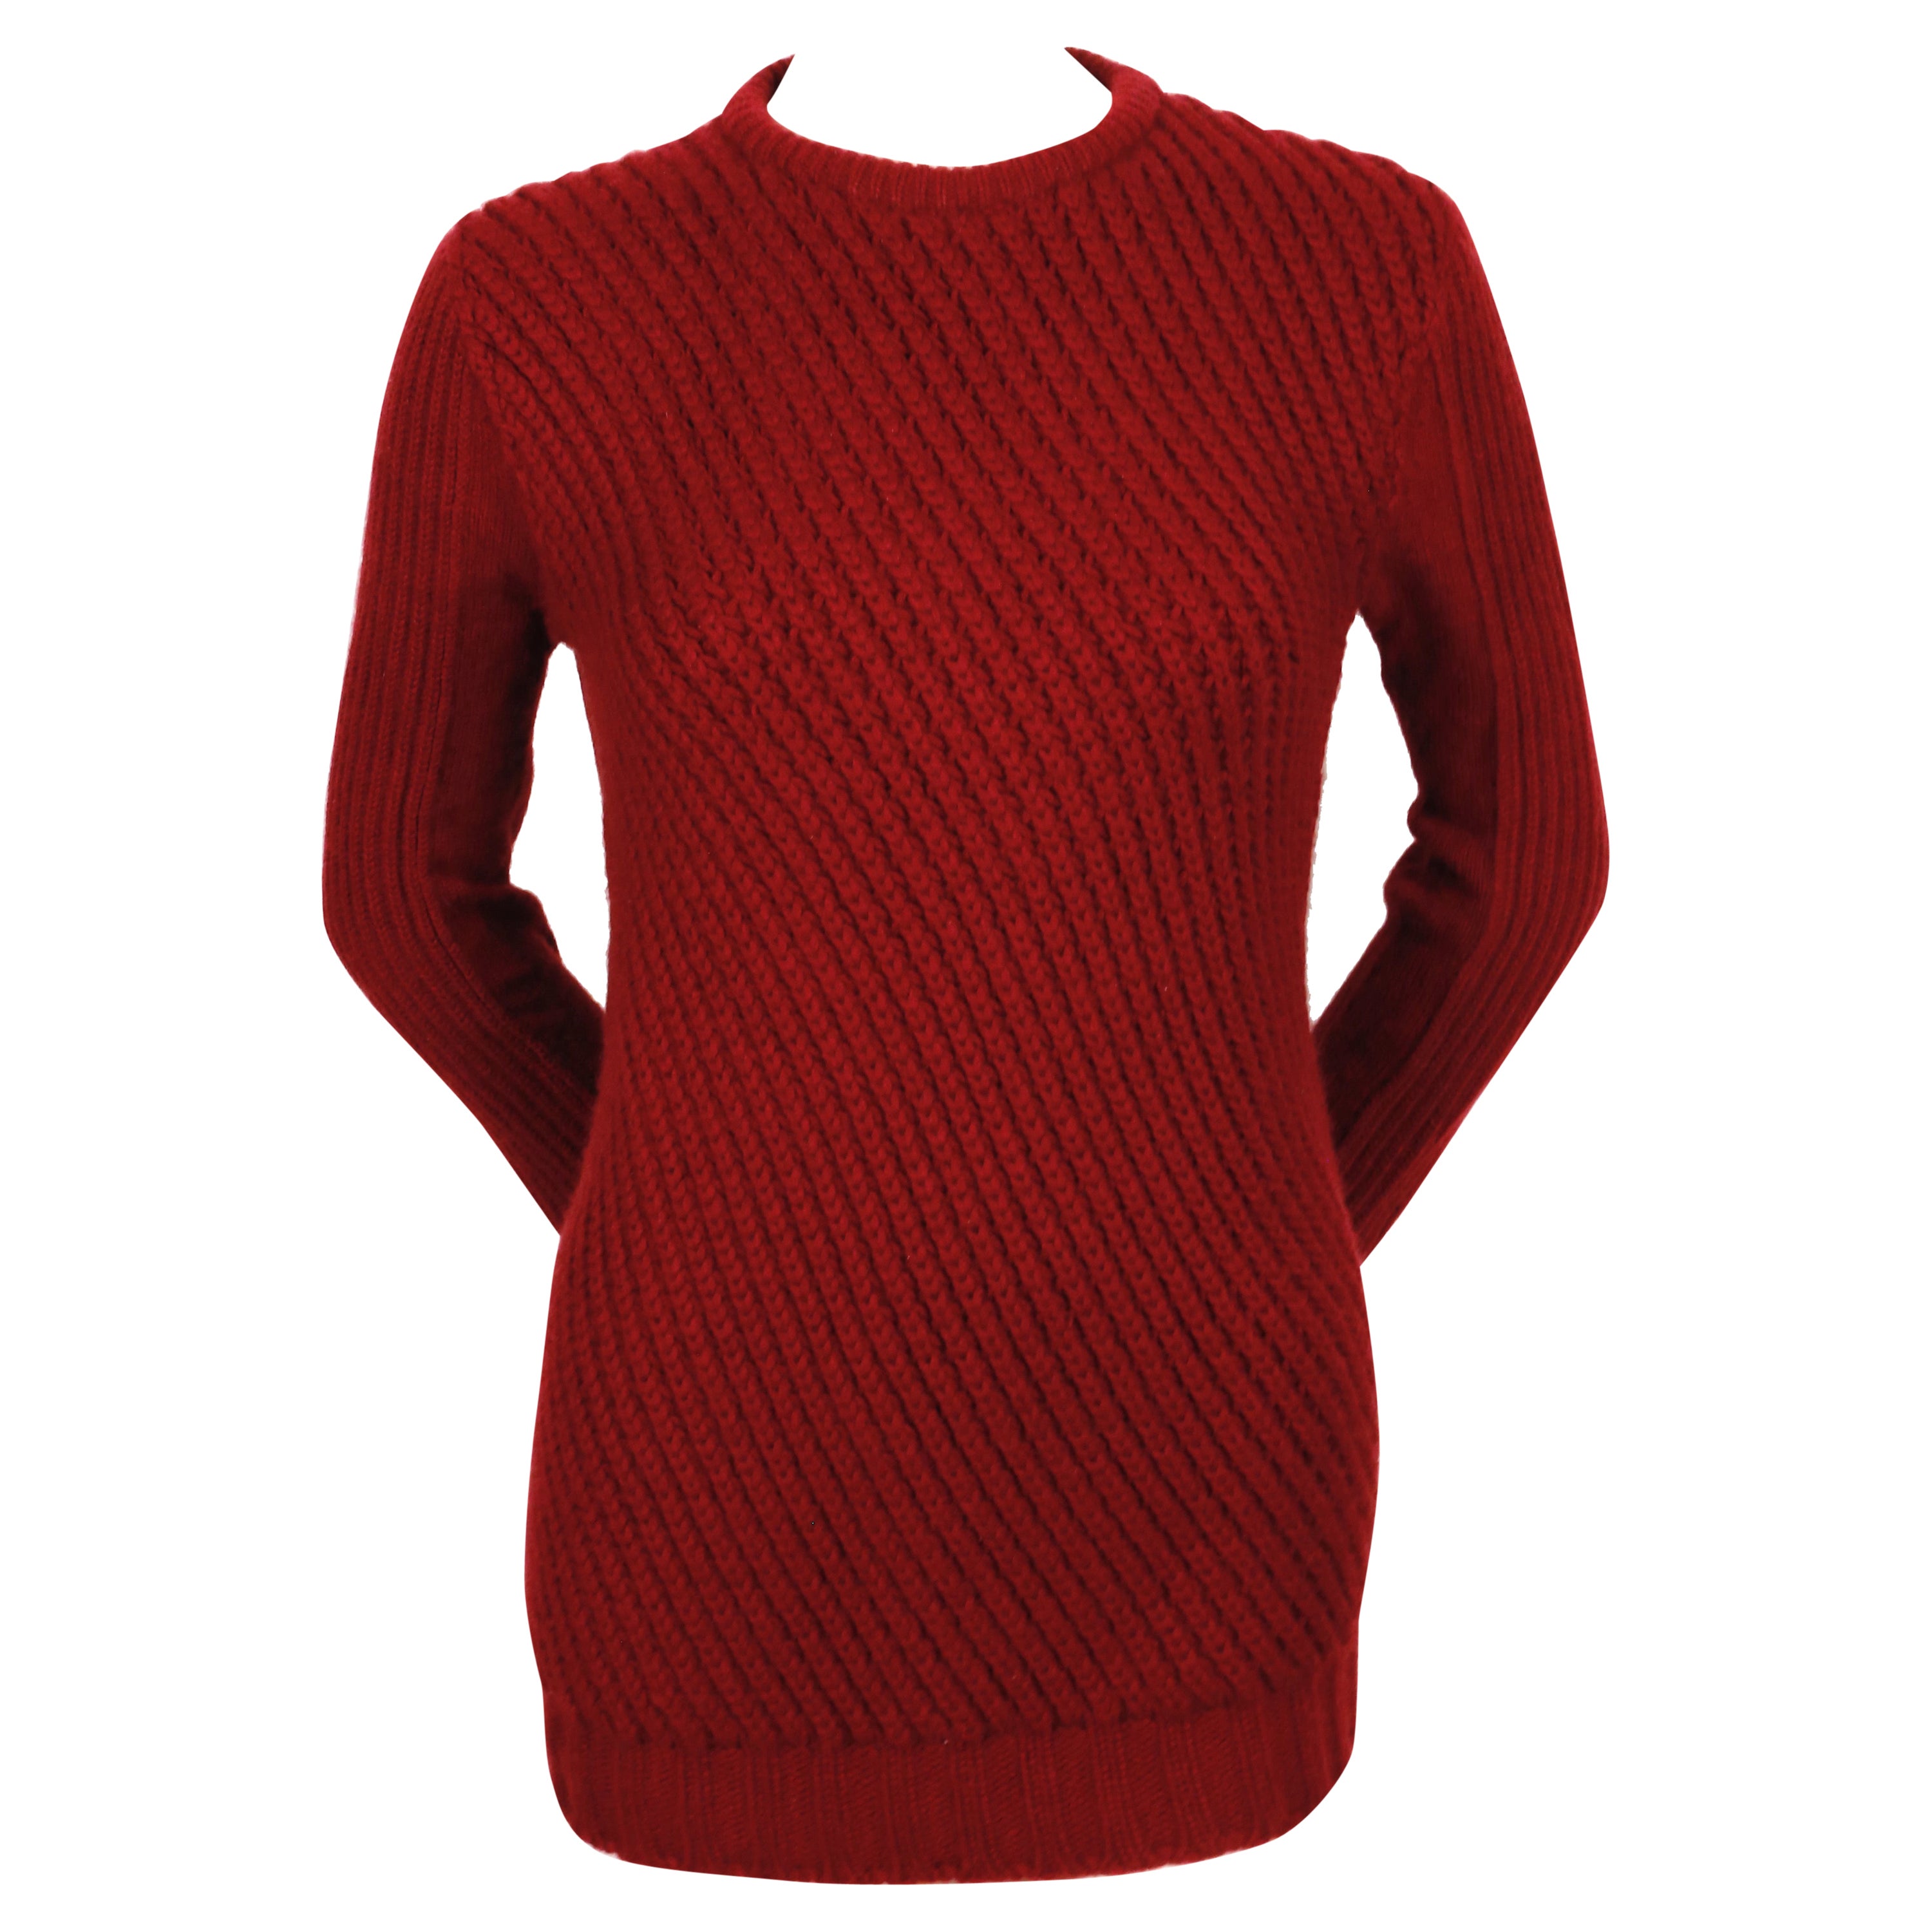 CELINE by PHOEBE PHILO diagonally ribbed burgundy cashmere sweater 